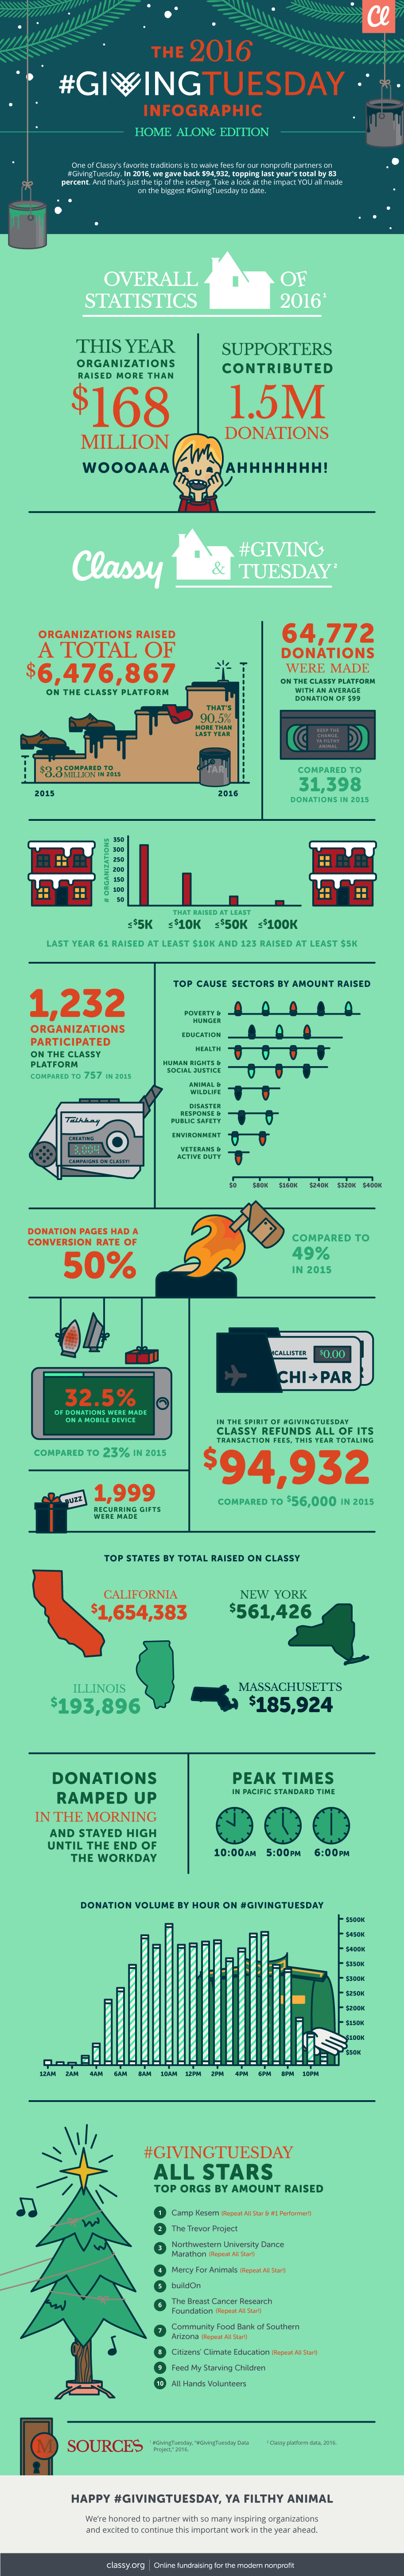 giving tuesday infographic